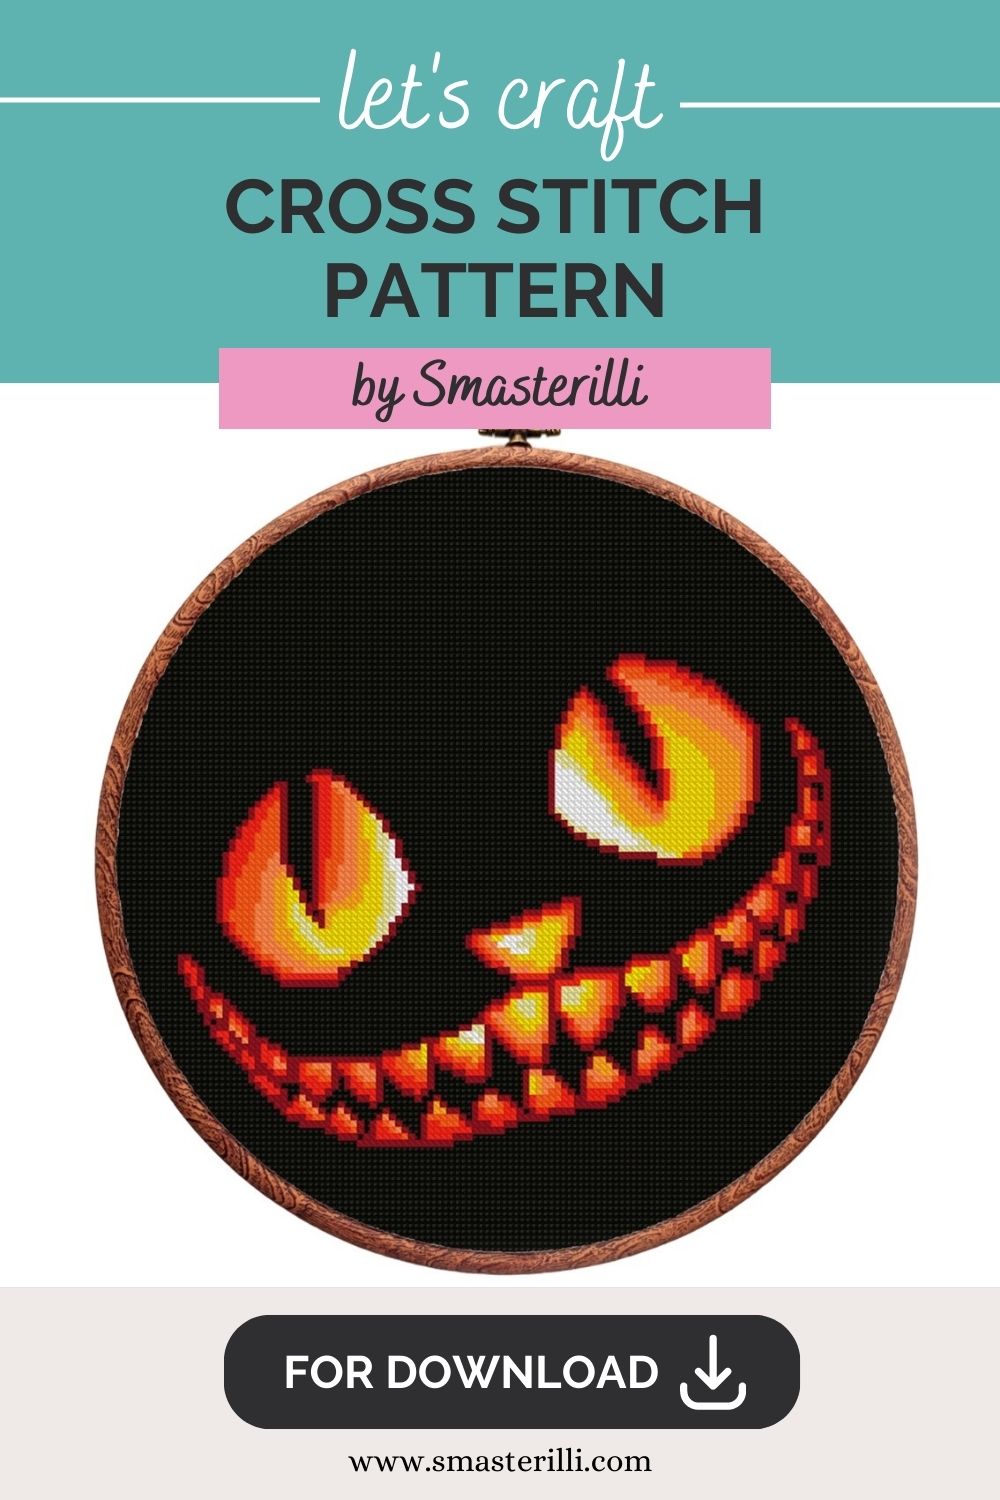 Halloween cheshire smiling cat cross stitch pattern by Smasterilli. Digital cross stitch pattern for instant download. Cat Lover's Gift idea for handmade craft. Halloween handmade crafts #smasterilli #crossstitch #crossstitchpattern #halloweencrossstitch #halloweengift #catcrossstitch #cheshirecat